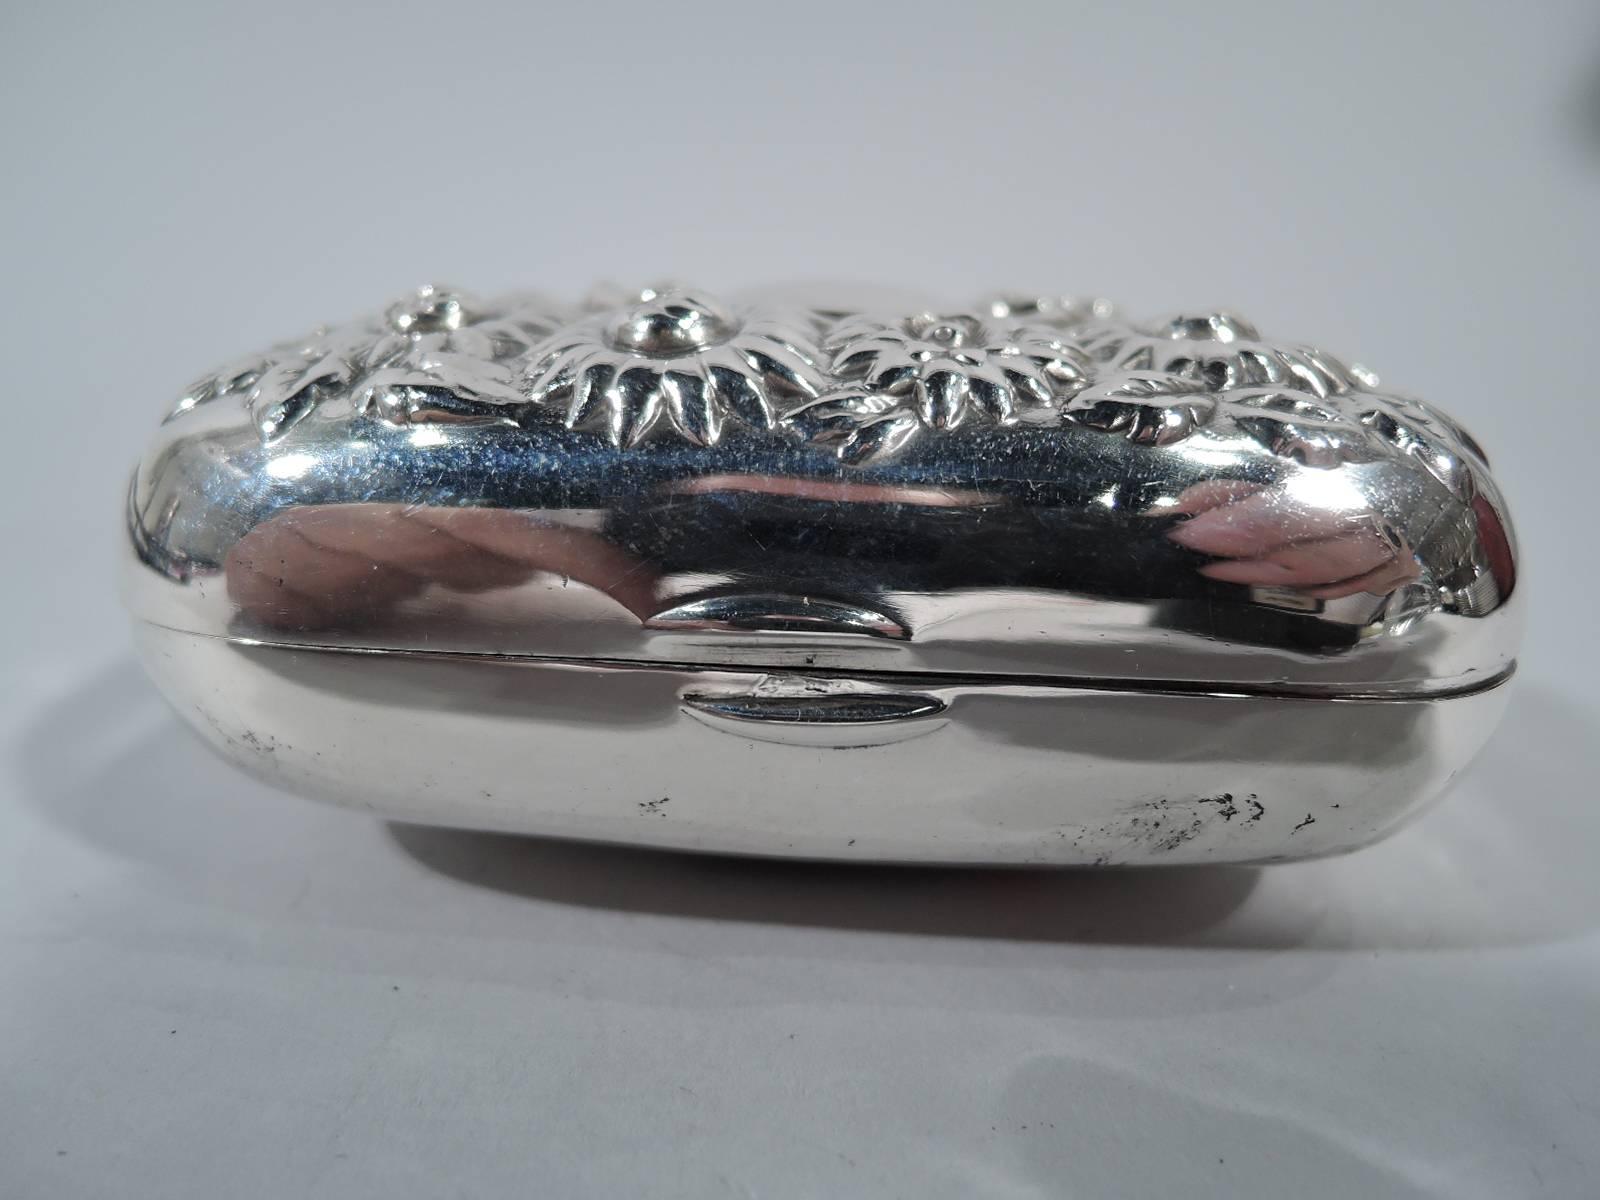 American sterling silver soap box, circa 1900. Rectangular with curved corners and hinged cover. Cover has central scrolled frame (vacant) surrounded by dense repousse daisies. Hallmarked “sterling”. Very good condition with nice definition. Weight: